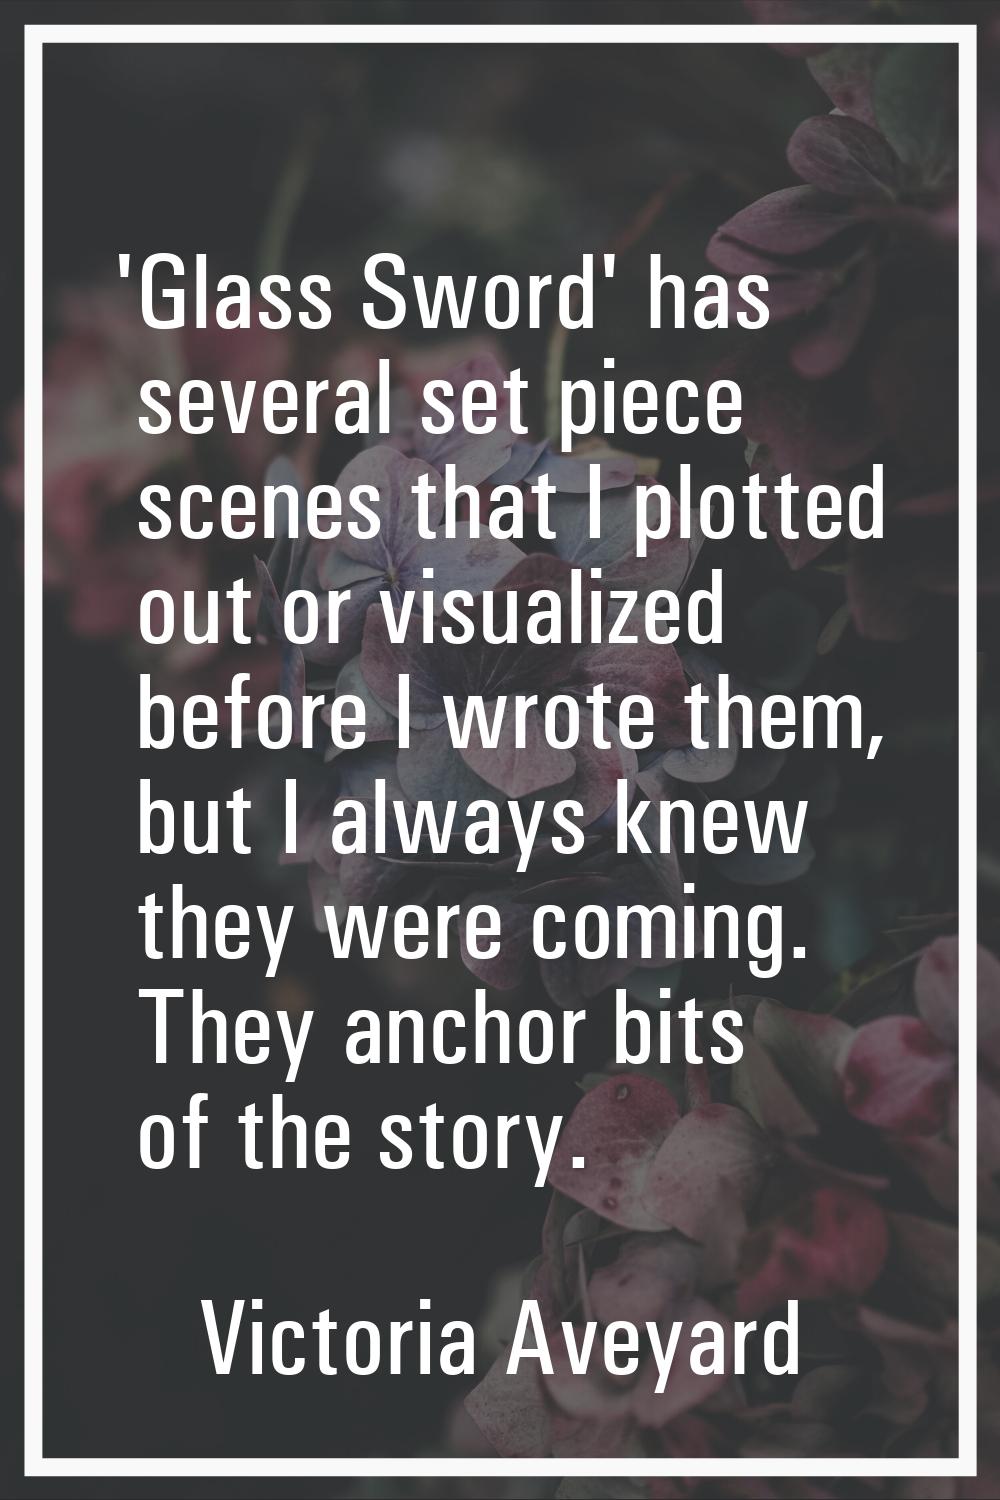 'Glass Sword' has several set piece scenes that I plotted out or visualized before I wrote them, bu